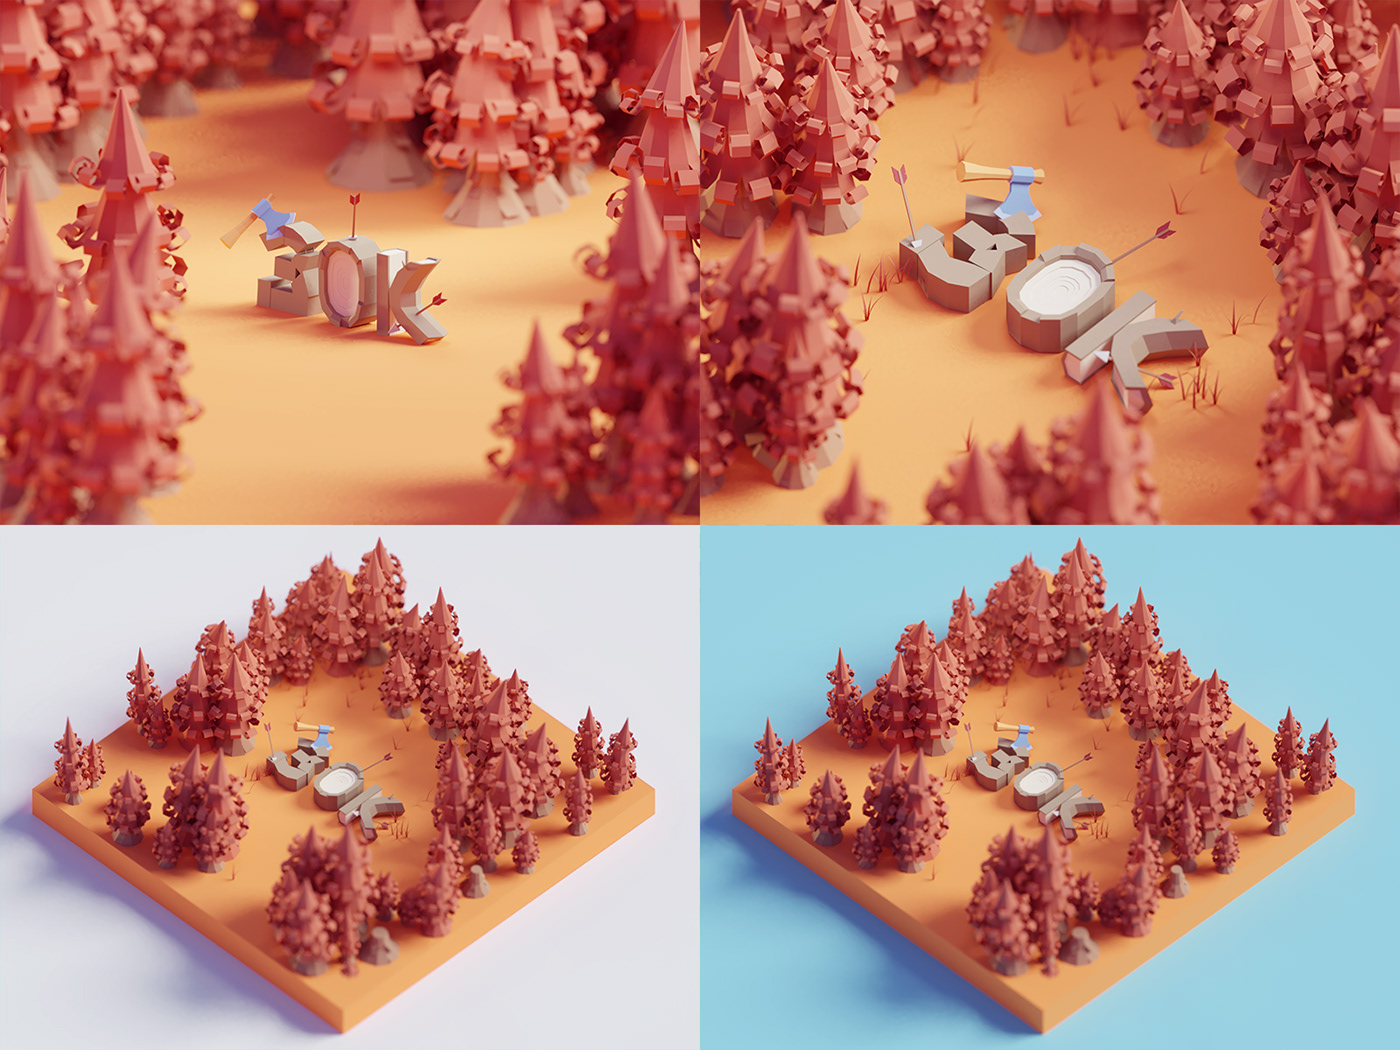 blender b3d Isometric Low Poly woods 30k layers hidden fossils trees